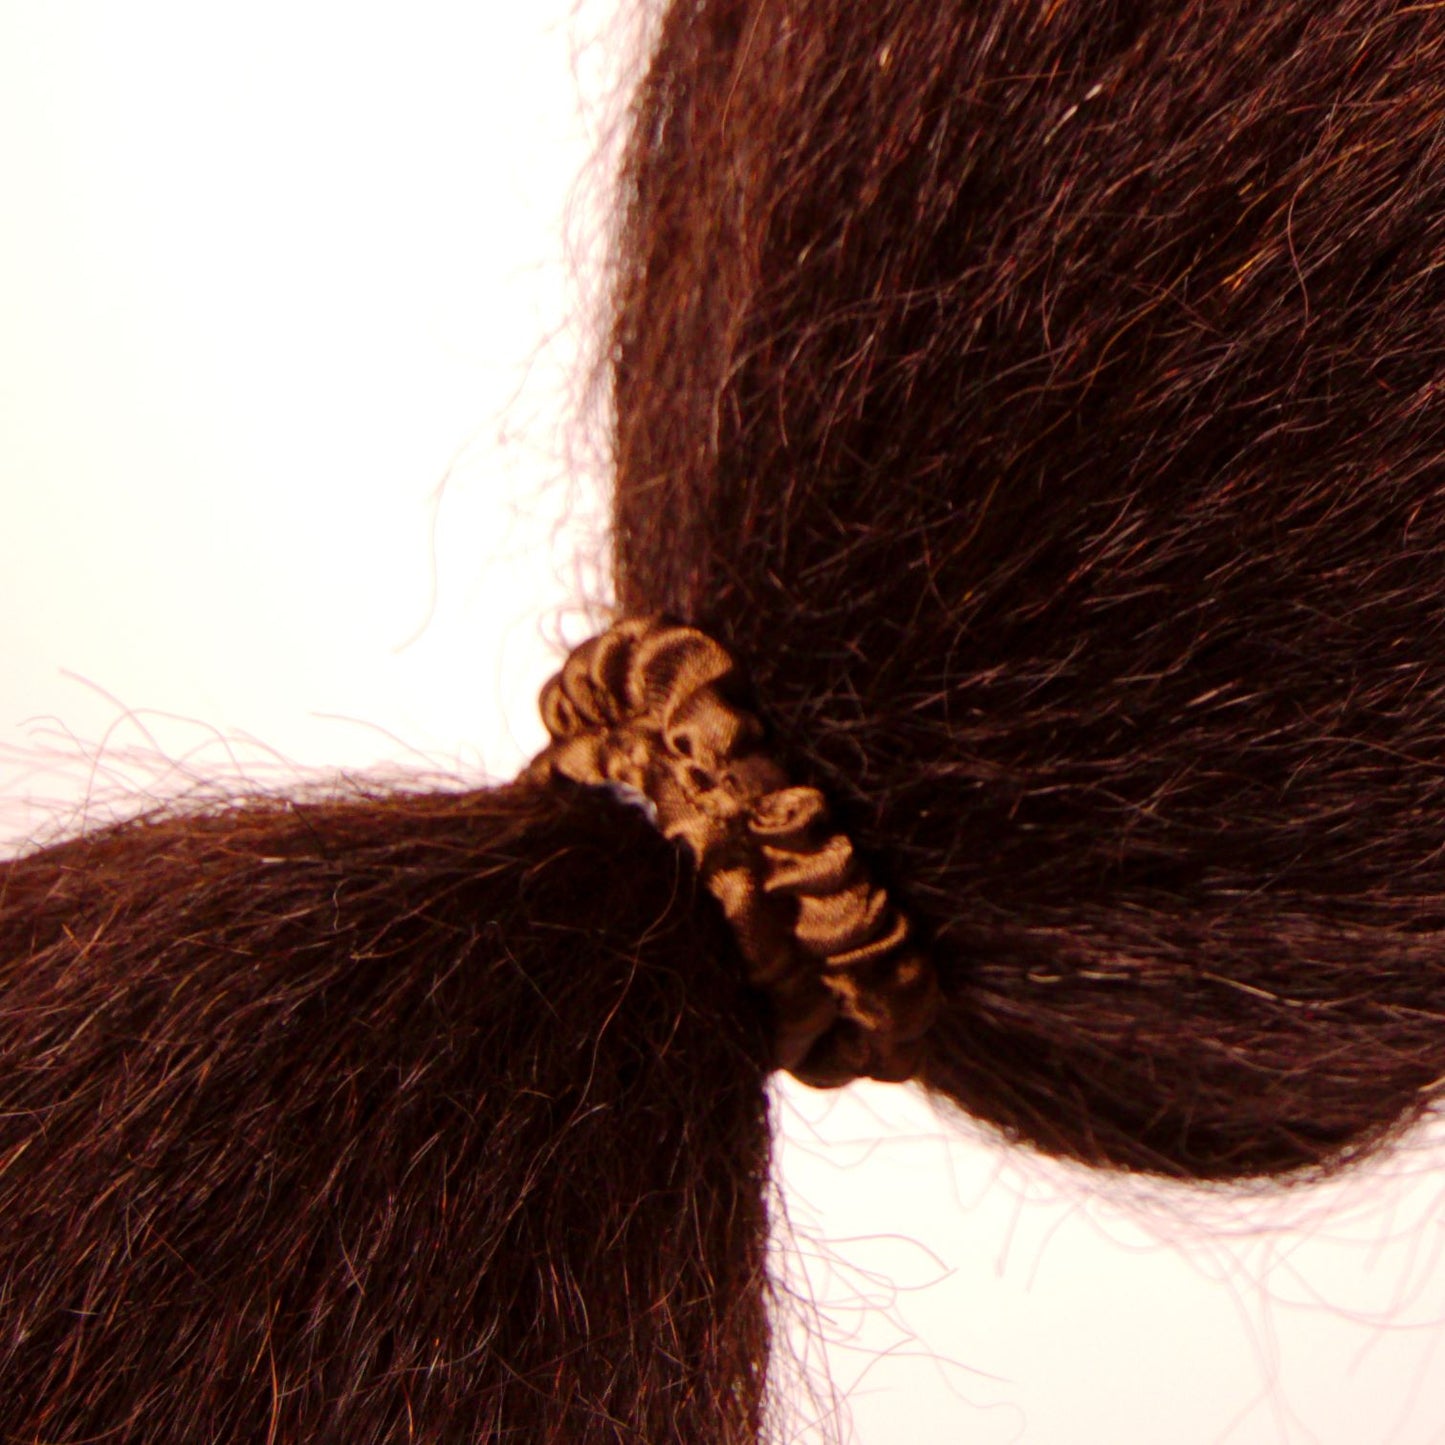 Amelia Beauty, Brown Skinny Satin Scrunchies, 2in Diameter, Gentle and Strong Hold, No Snag, No Dents or Creases. 12 Pack